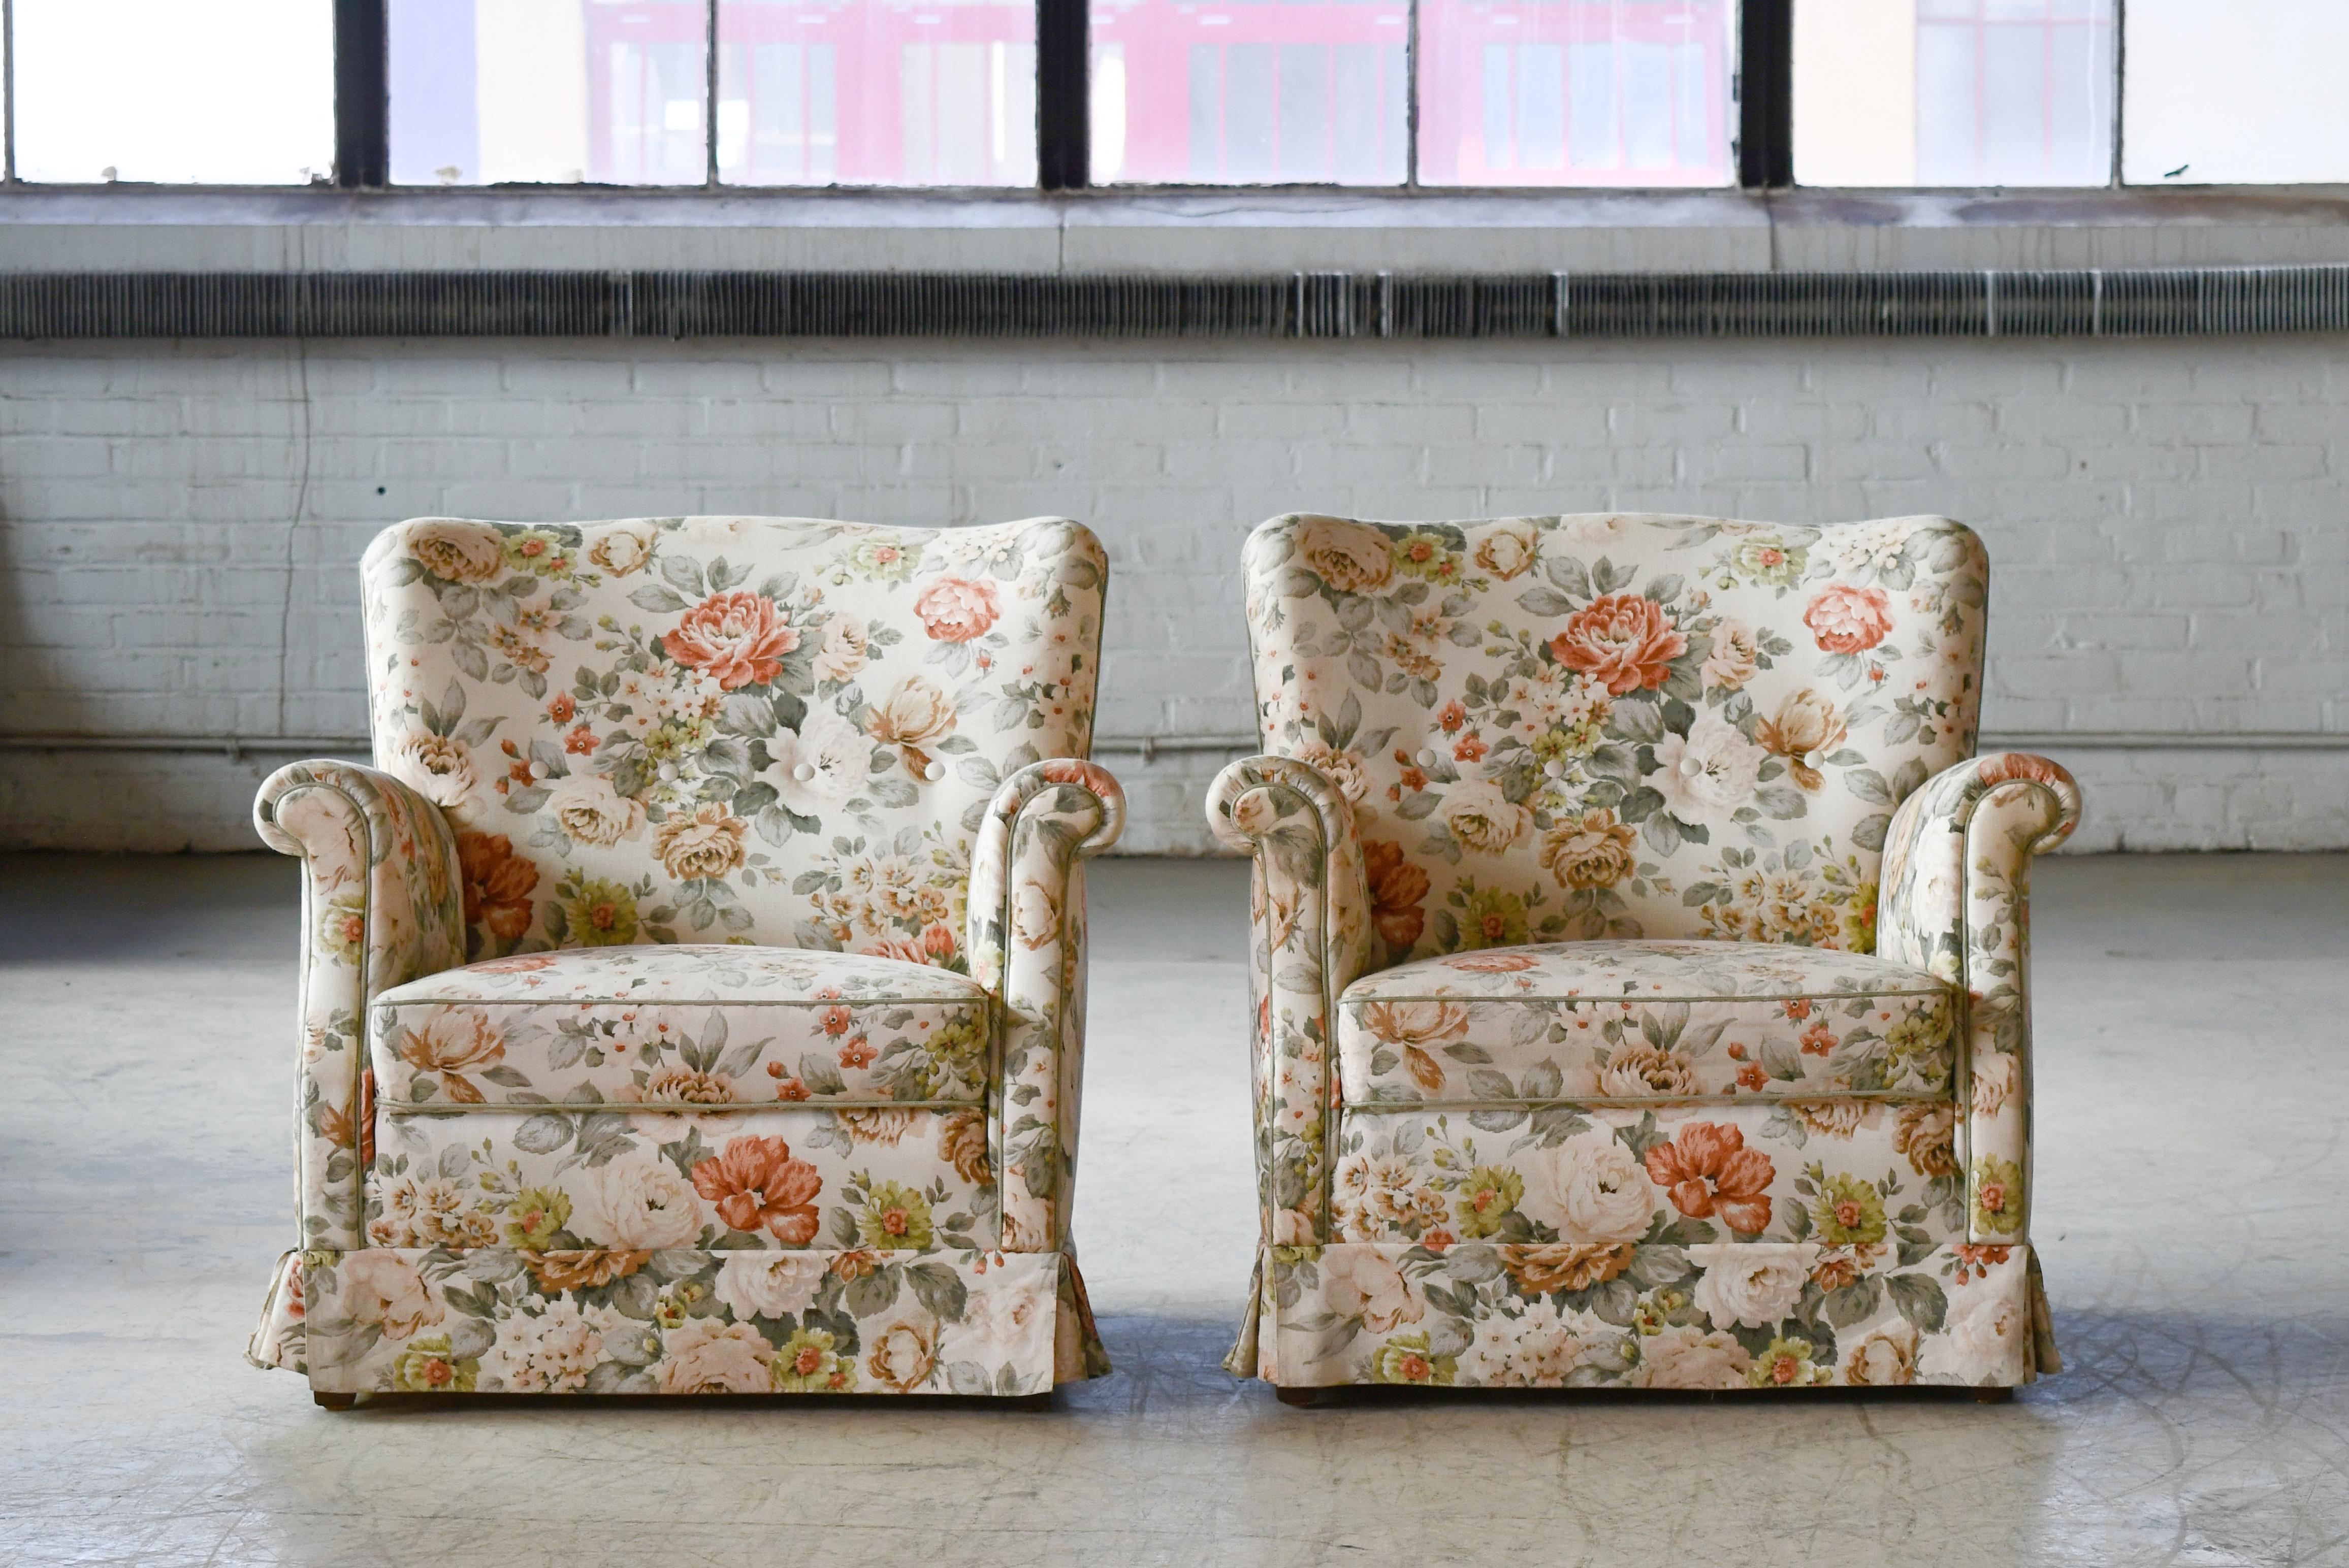 Mid-20th Century Pair of Danish 1950s Medium Size Lounge Chairs in Floral Fabric and Skirts For Sale